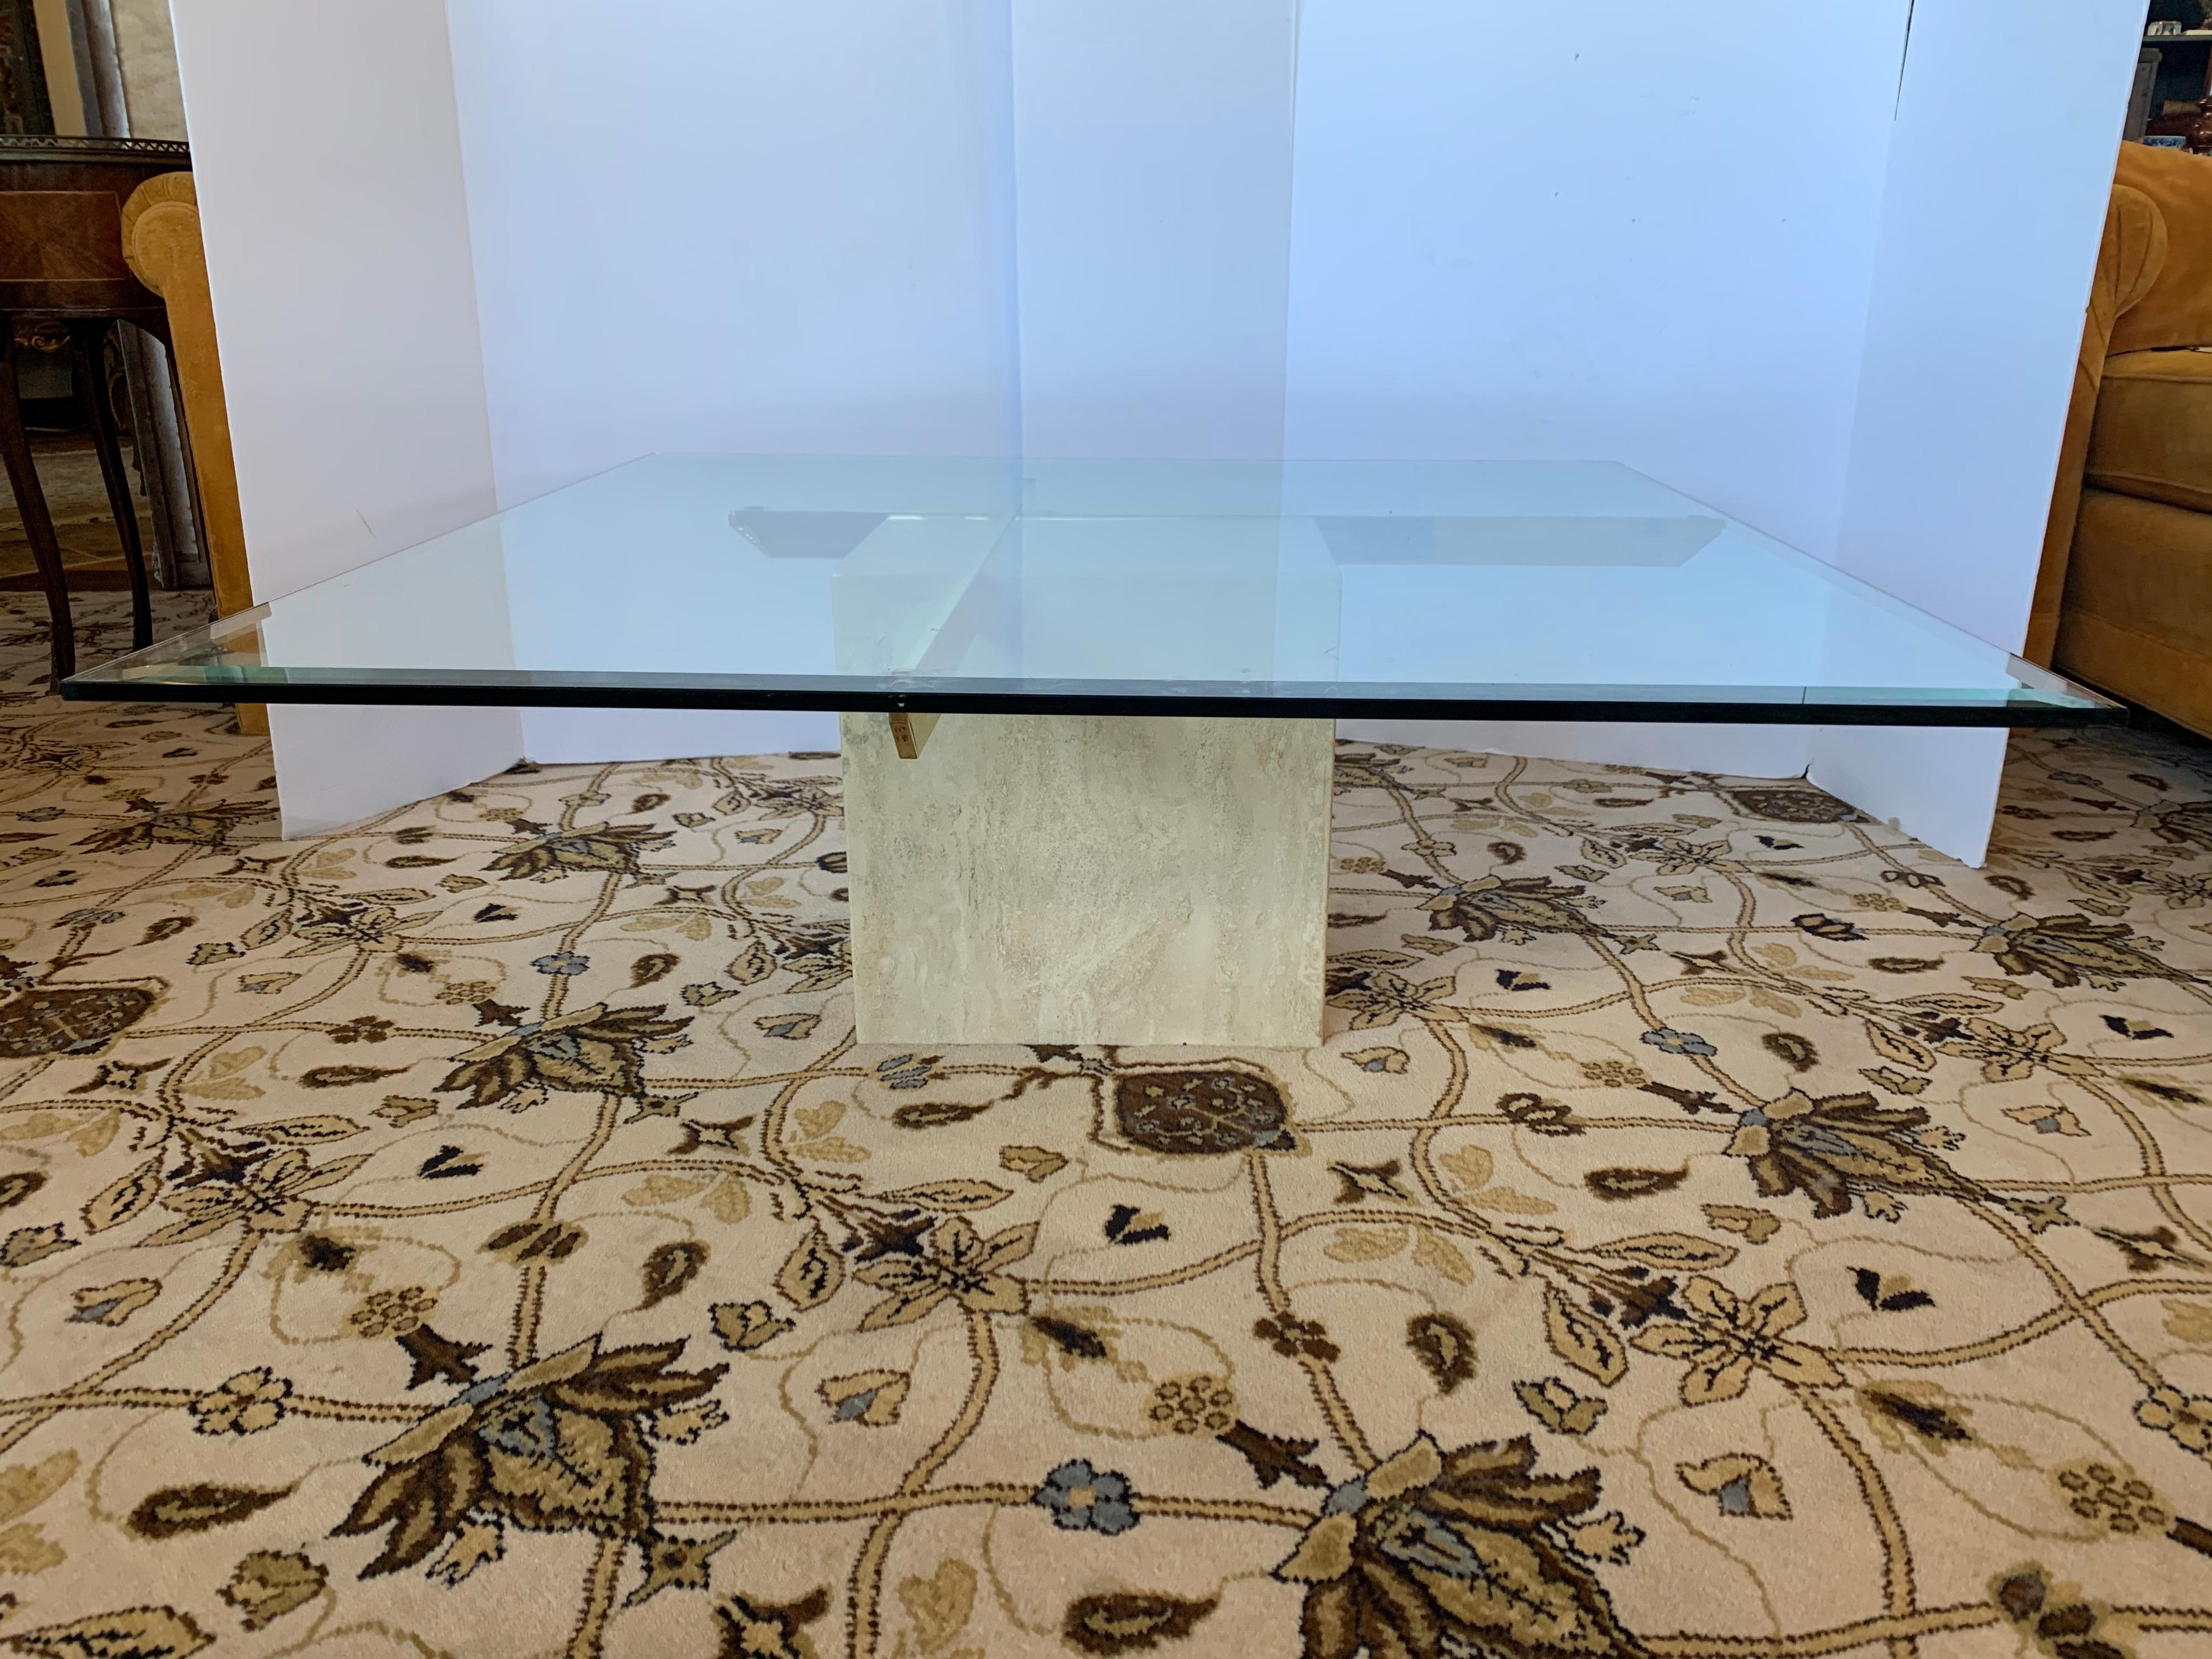 Magnificent Mid-Century Modern Artedi coffee table features a thick square glass top with a travertine base. Sleek design with two brass supports fitted inside the travertine marble base holds the large glass tabletop. This elegant piece makes the